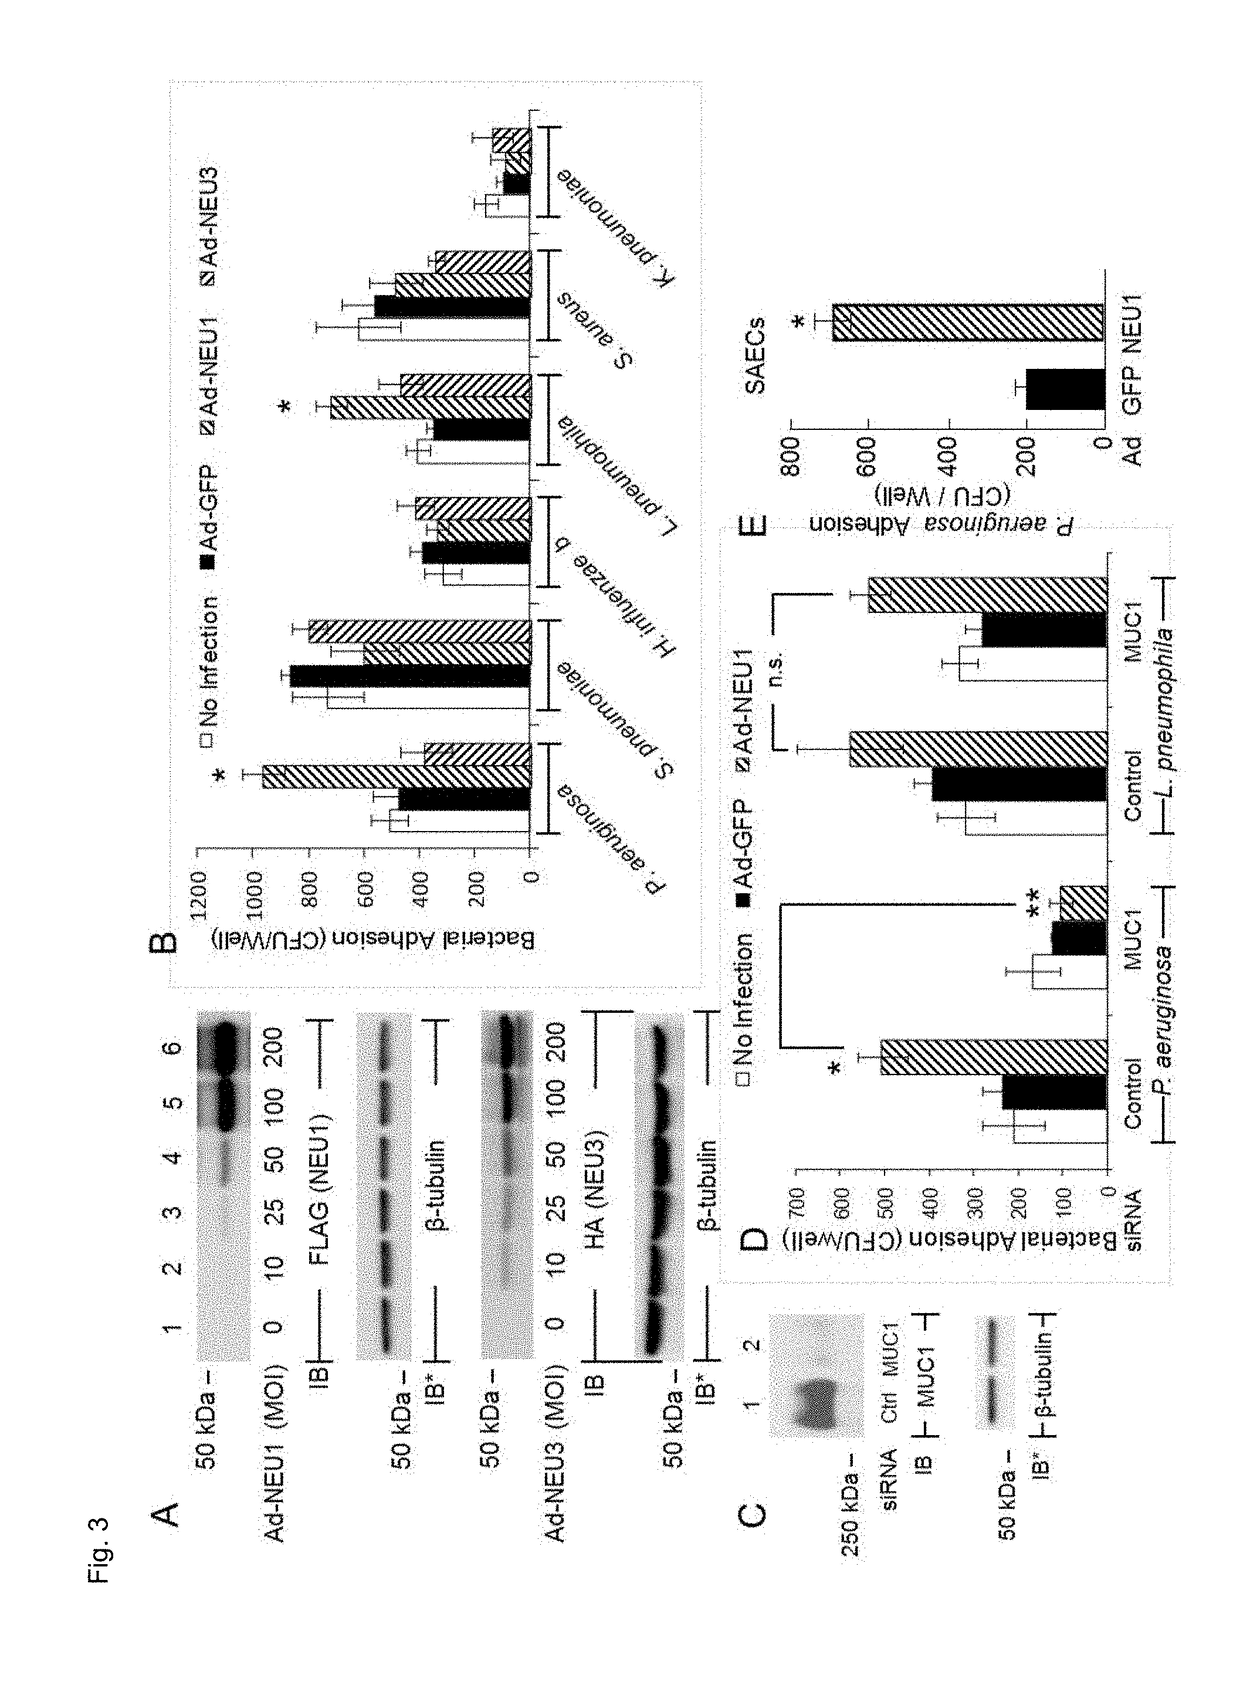 Muc1 decoy peptides for treatment and prevention of bacterial infections